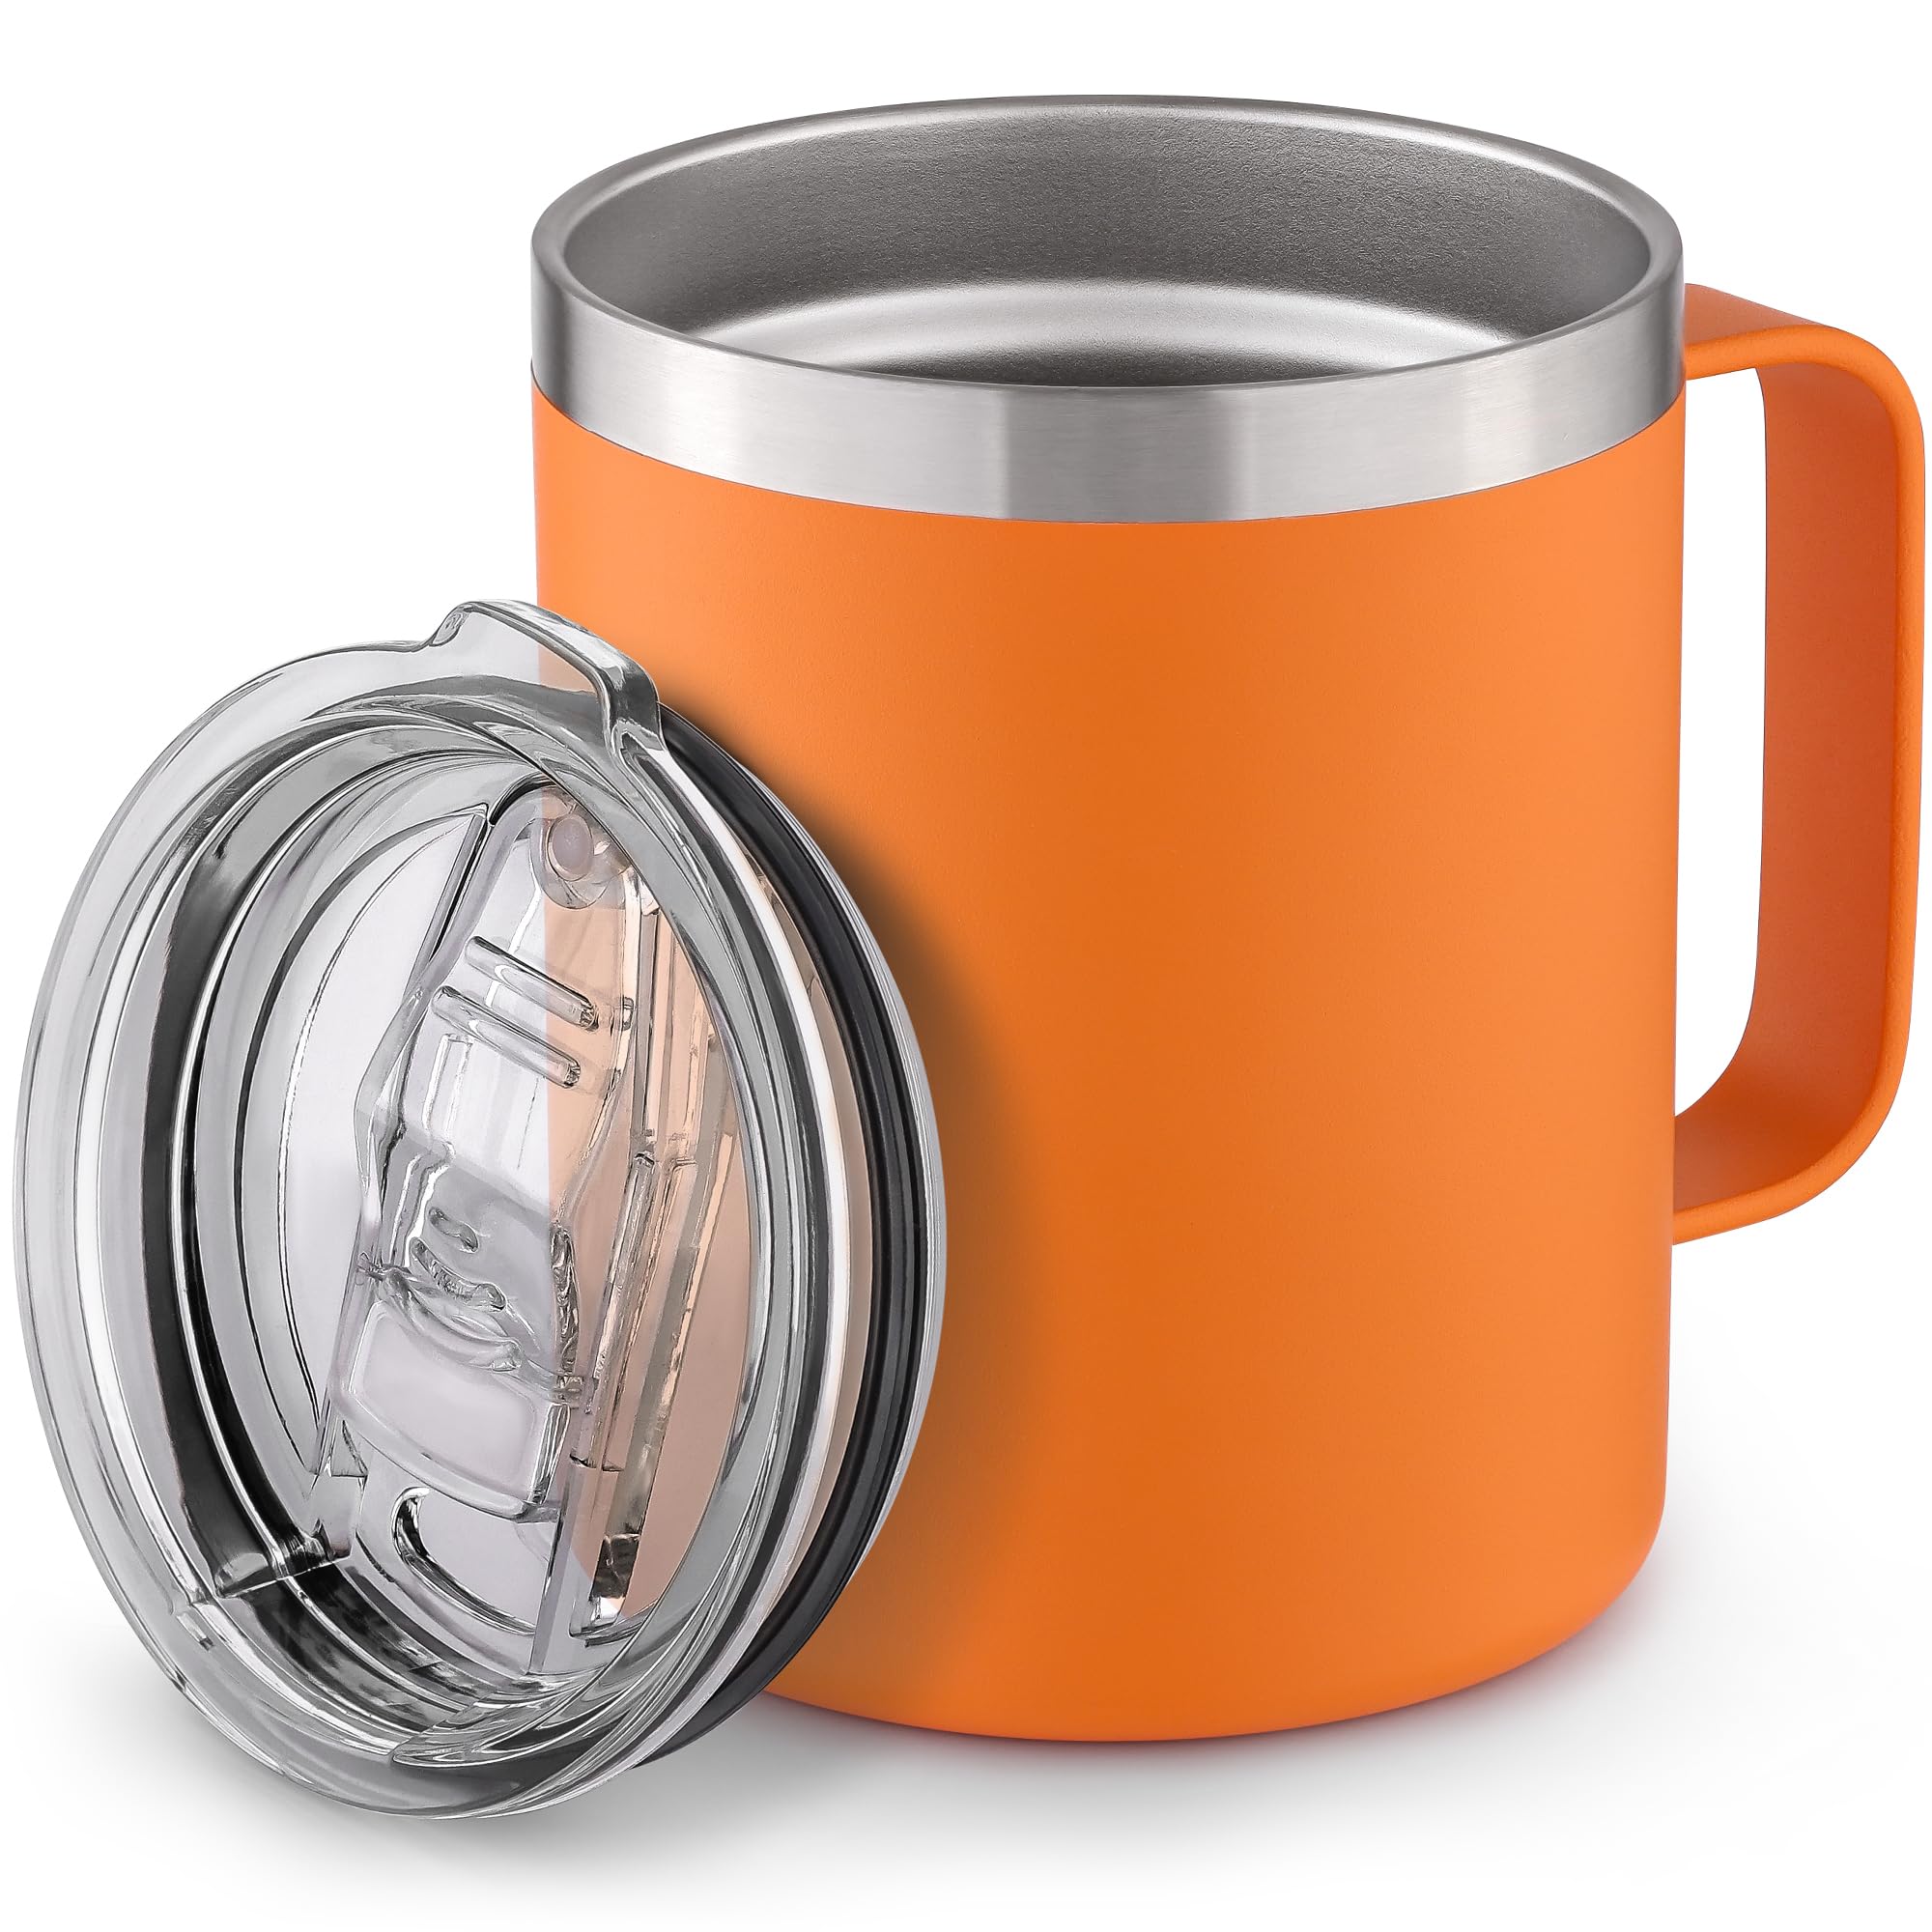 Zulay 14 oz Insulated Coffee Mug with Lid - Stainless Steel Camping Mug Tumbler with Handle - Double Wall Vacuum Duracoated Insulated Mug For Travel, Camping, Office, Outdoor Apricot 14 oz with handle